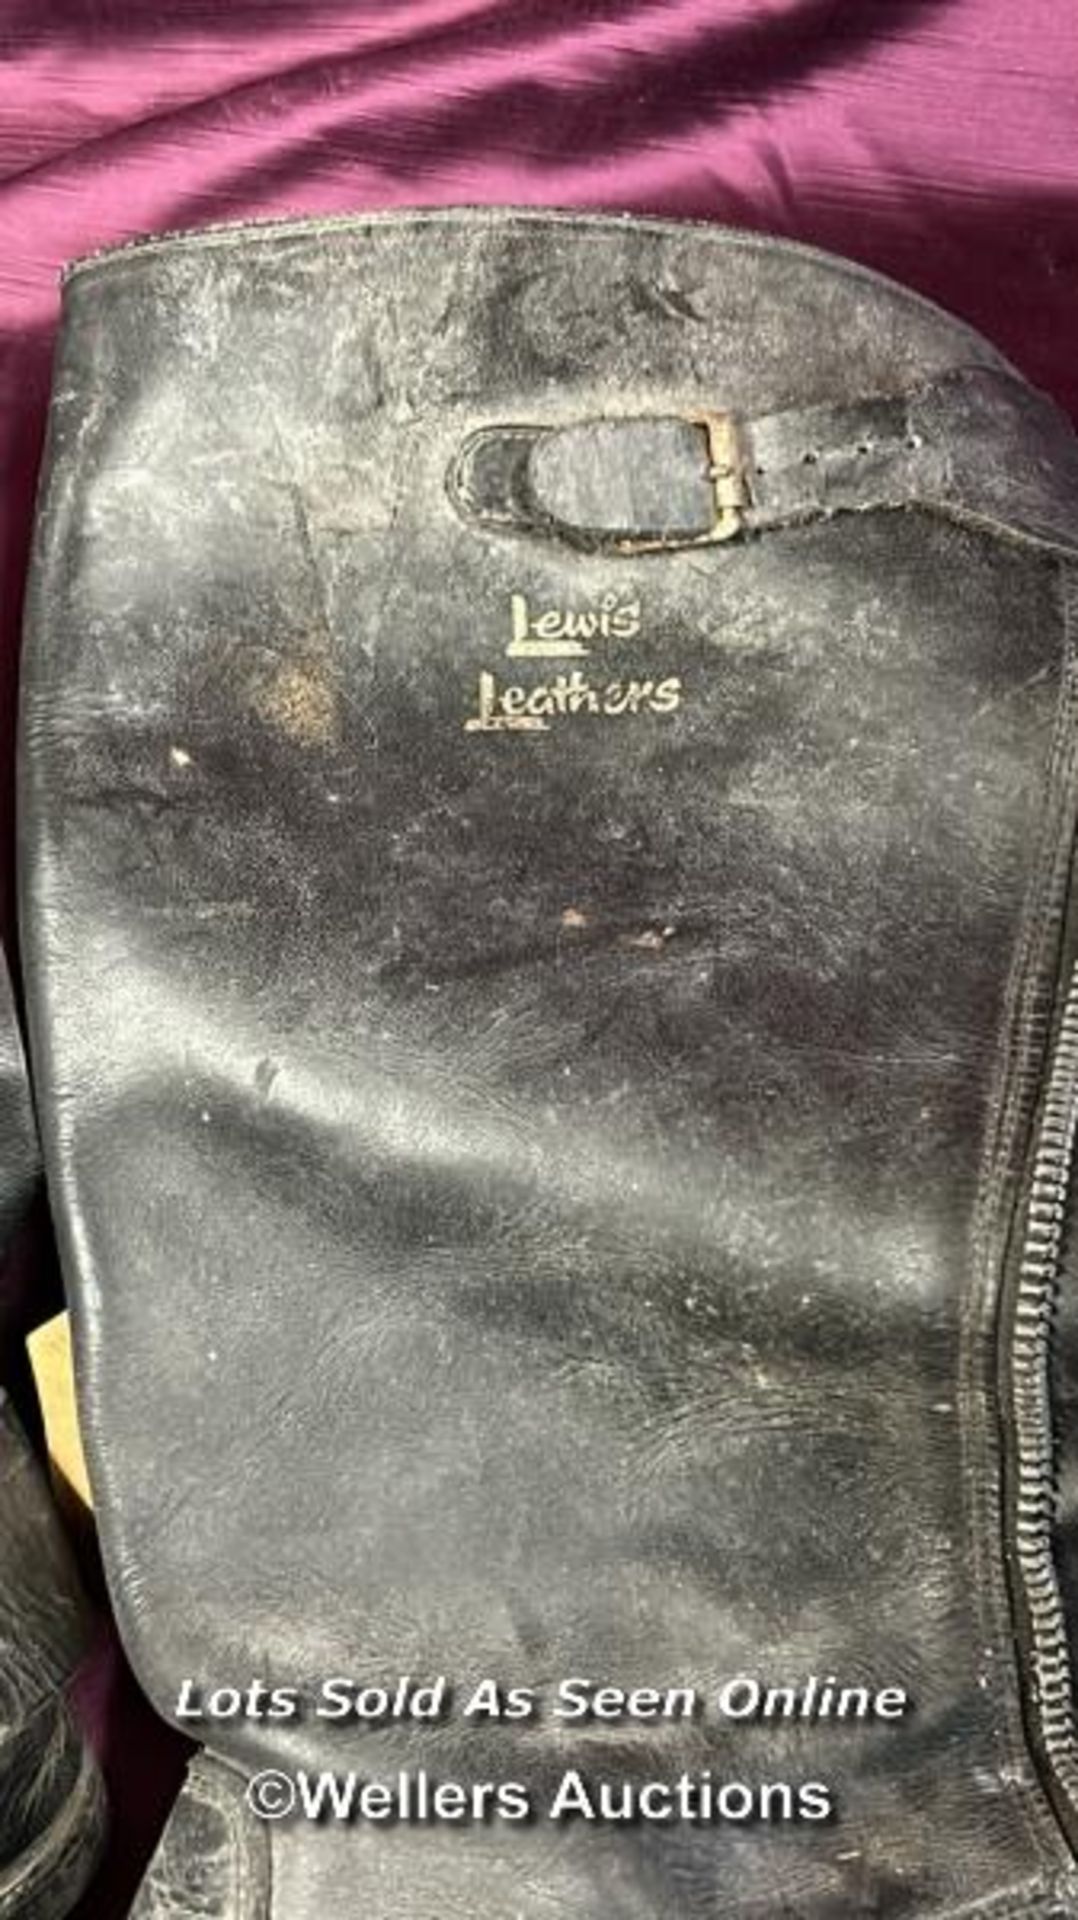 PAIR OF VINTAGE LEWIS LEATHERS BIKERS BOOTS - Image 3 of 4